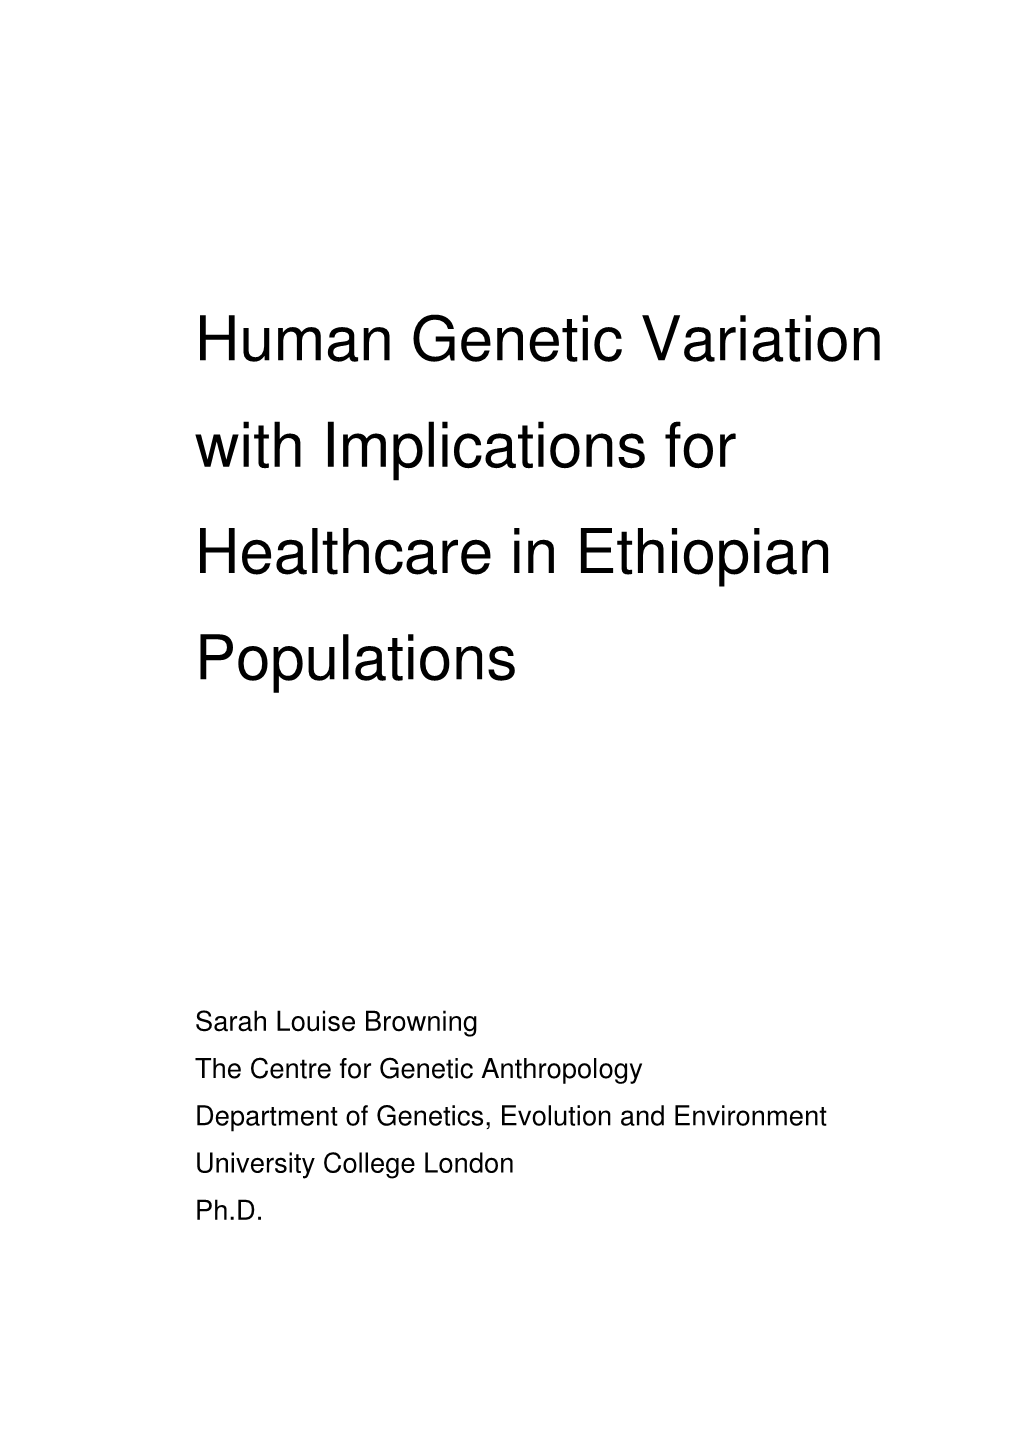 Human Genetic Variation with Implications for Healthcare in Ethiopian Populations